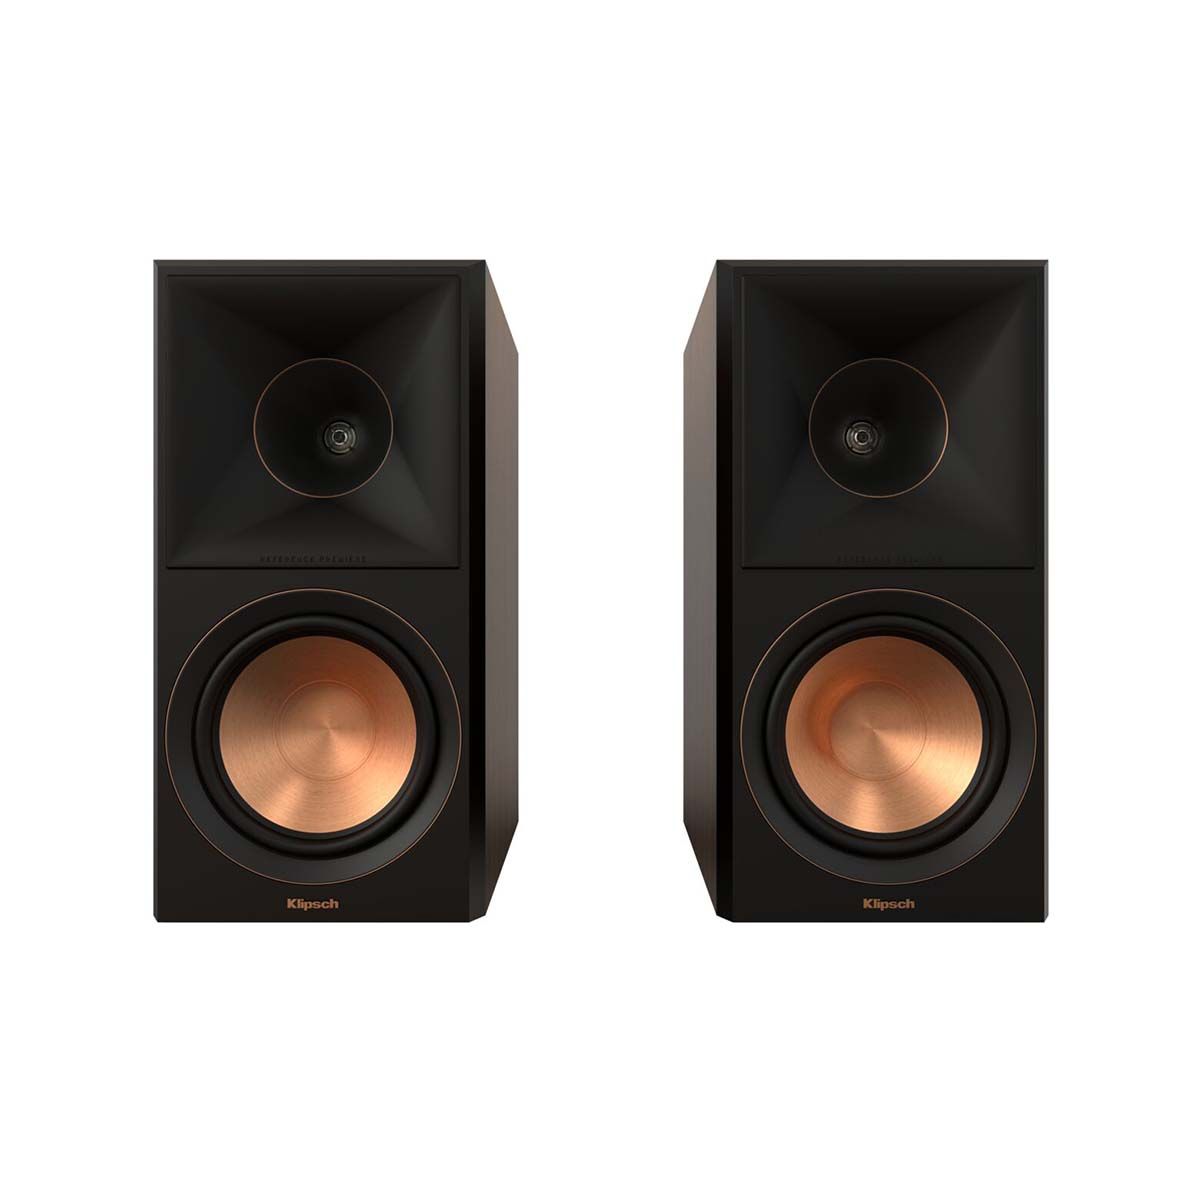 Klipsch RP-600M II Bookshelf Speakers - Walnut - Pair - front view of pair without grills